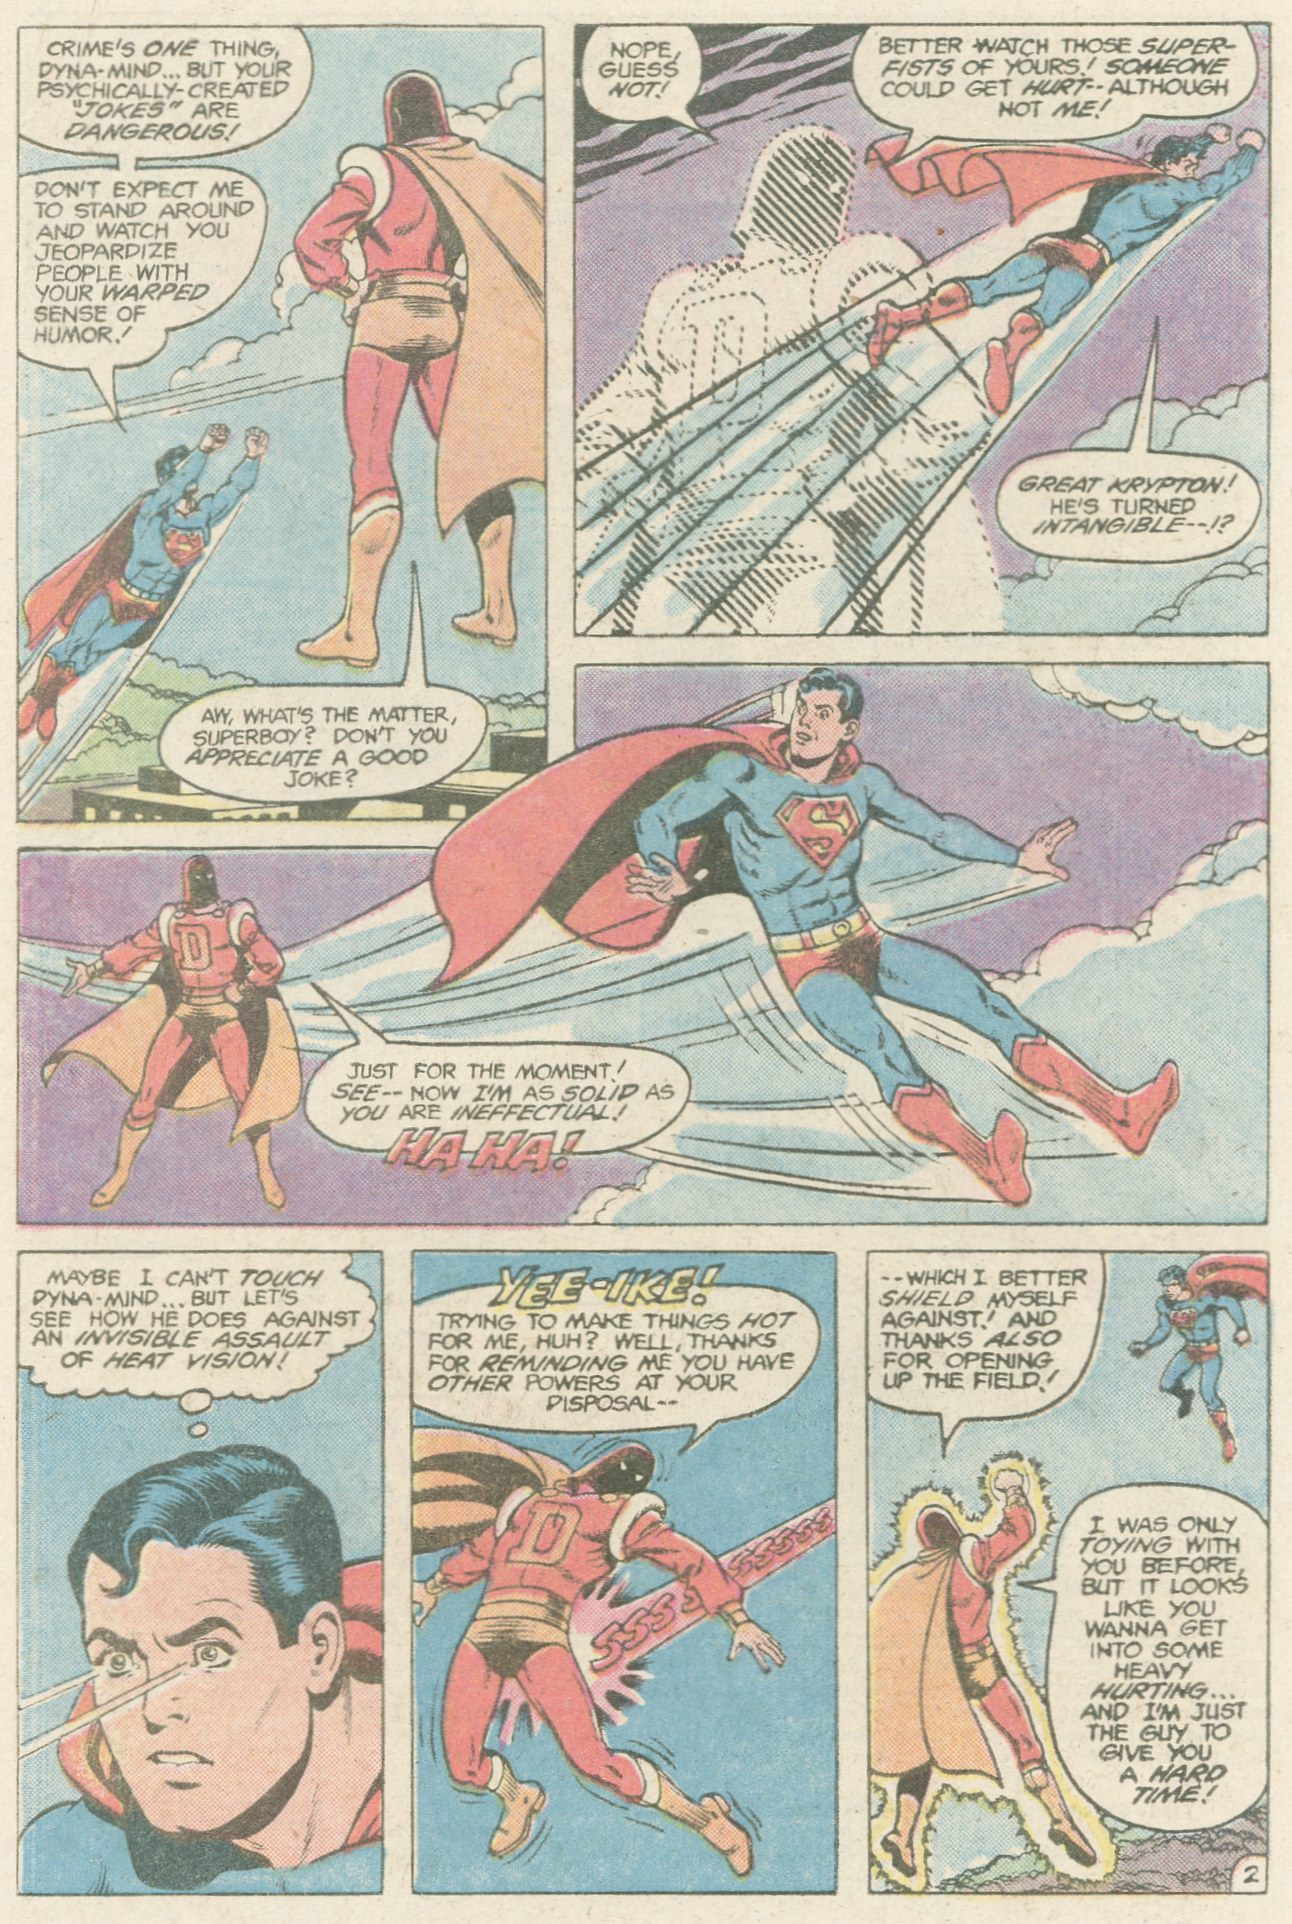 The New Adventures of Superboy 43 Page 2